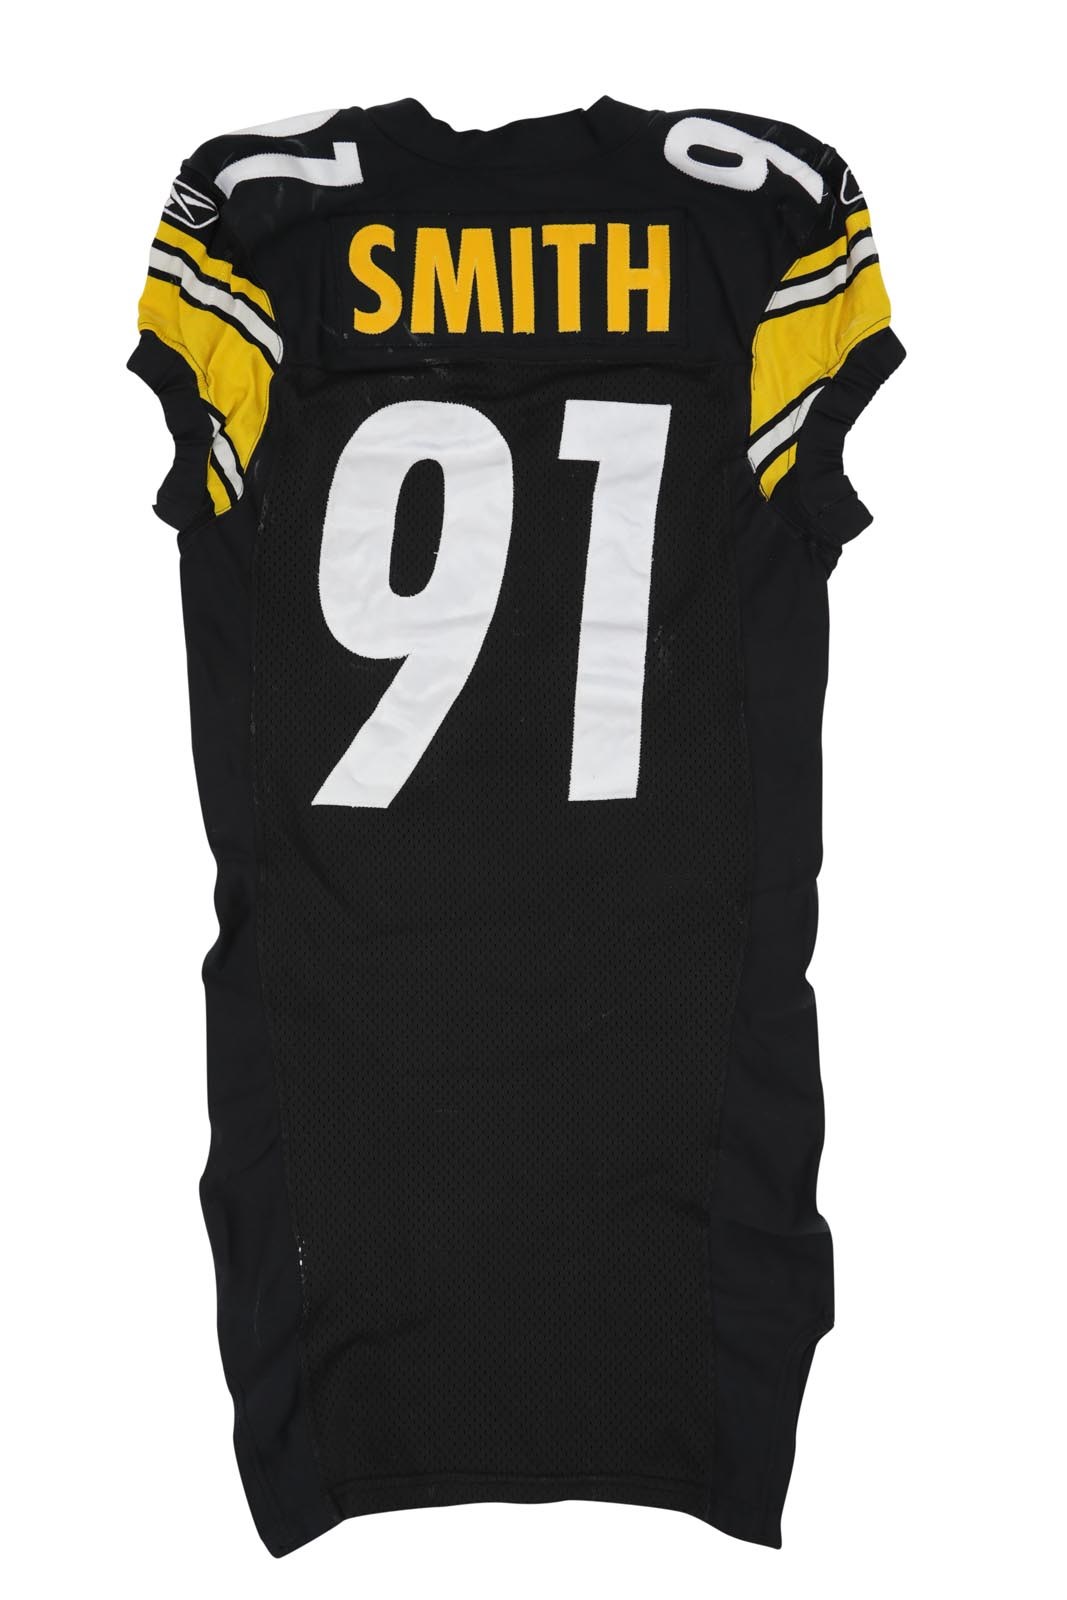 The Pittsburgh Steelers Game Worn Jersey Archive - 2005 Aaron Smith Game Worn Pittsburgh Steelers Jersey (Photo-Matched, Steelers COA)